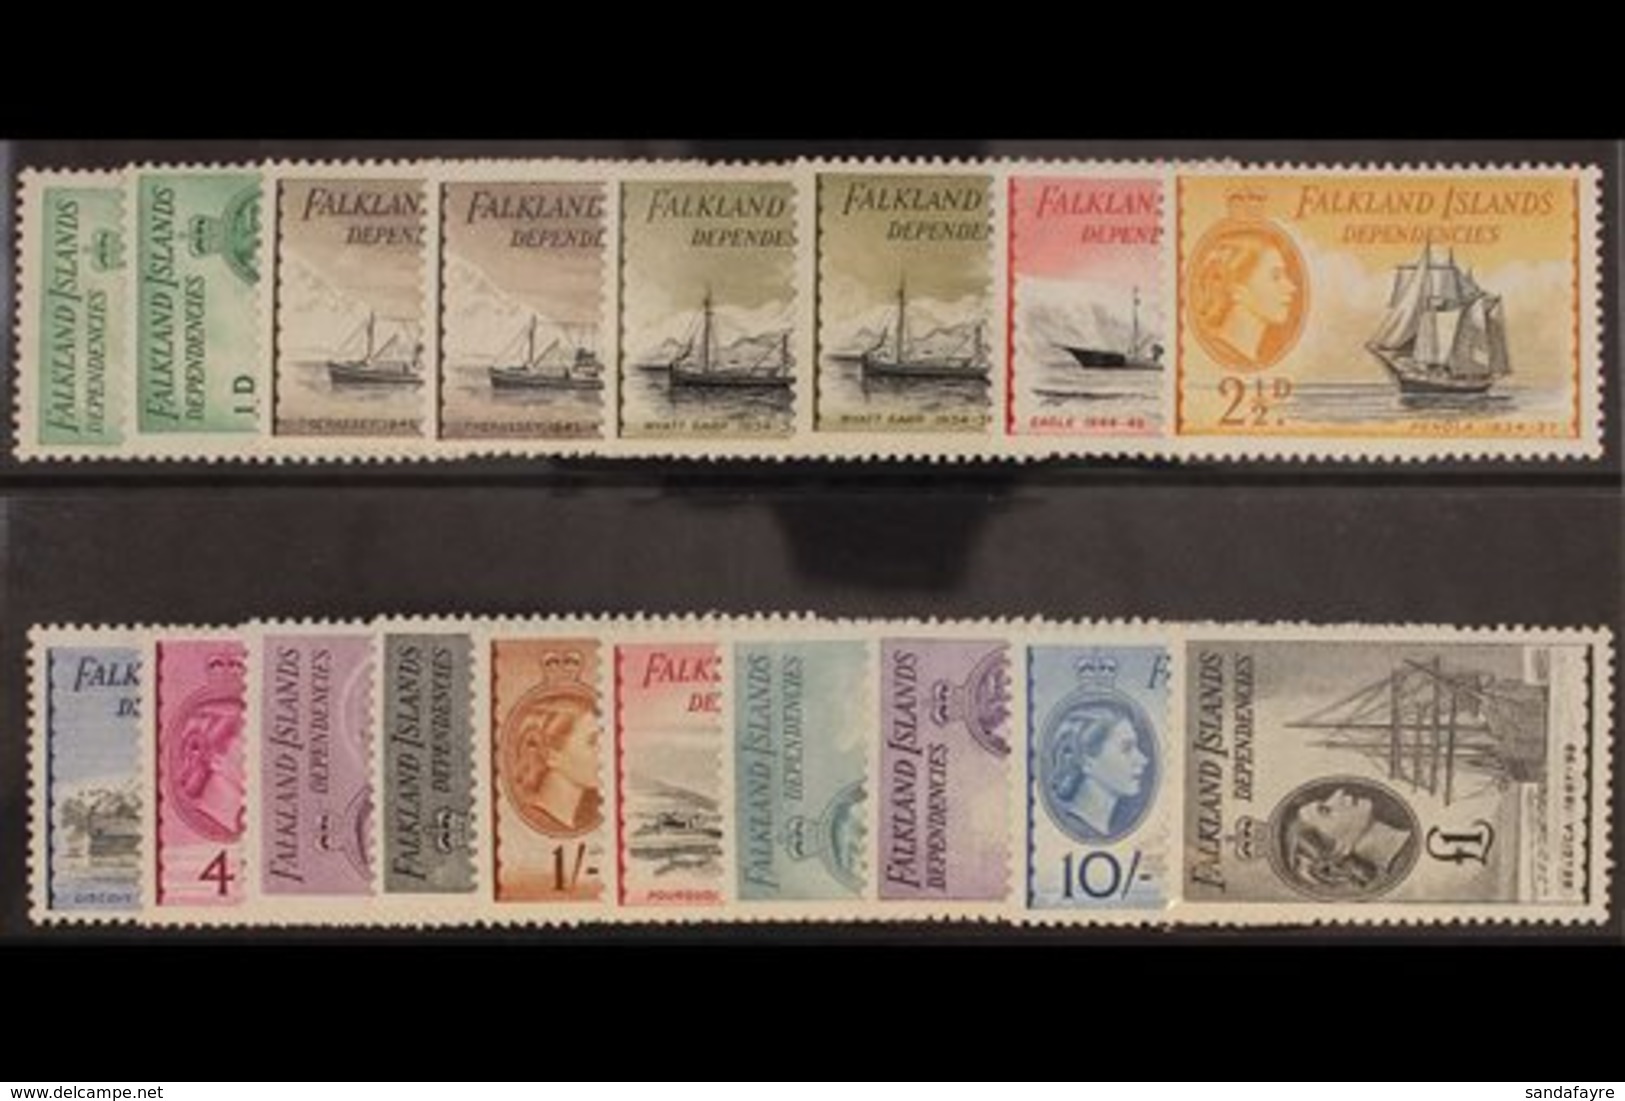 1954 Complete Set Including The DLR Printings,SG G26/40, G26a, 27b, 28a, Very Lighly Hinged Mint. (18 Stamps) For More I - Falkland Islands